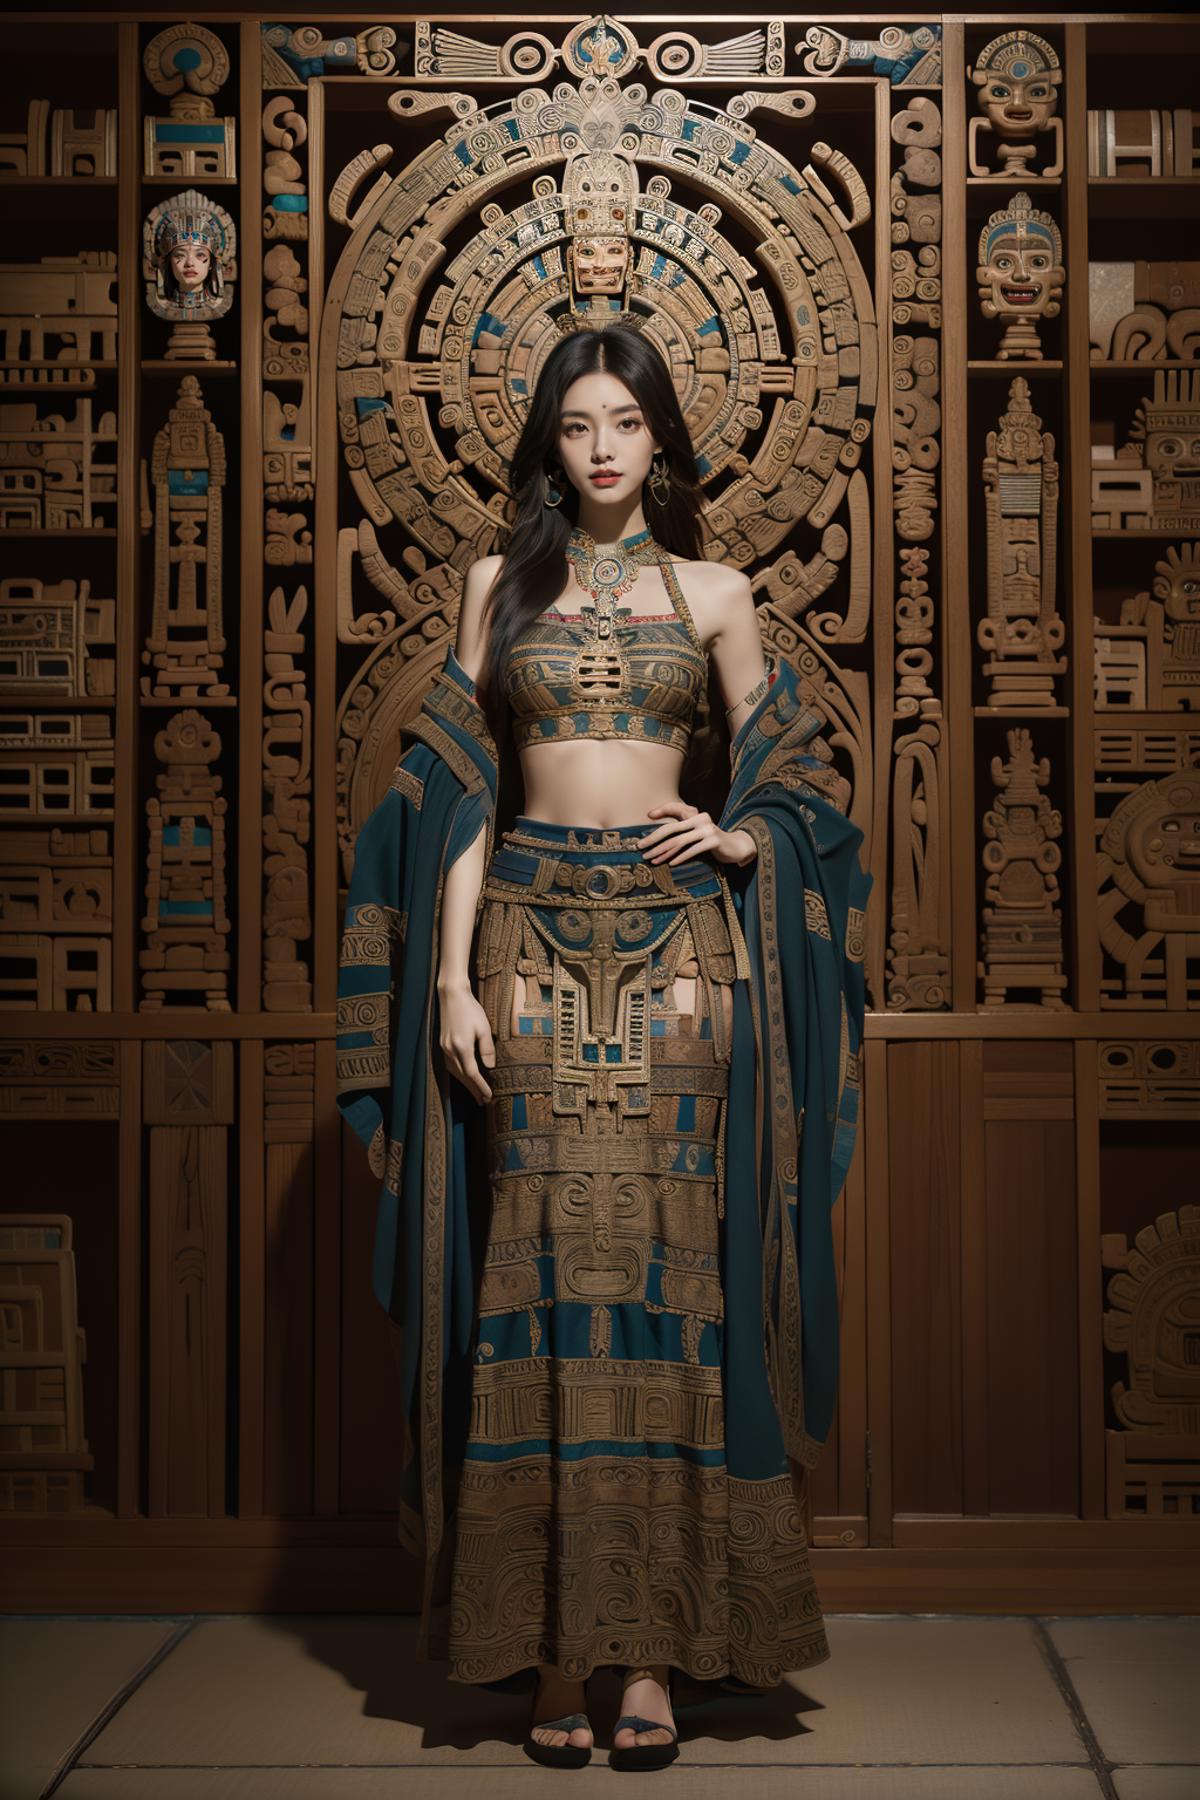 A woman in a blue dress poses in front of a wooden structure.